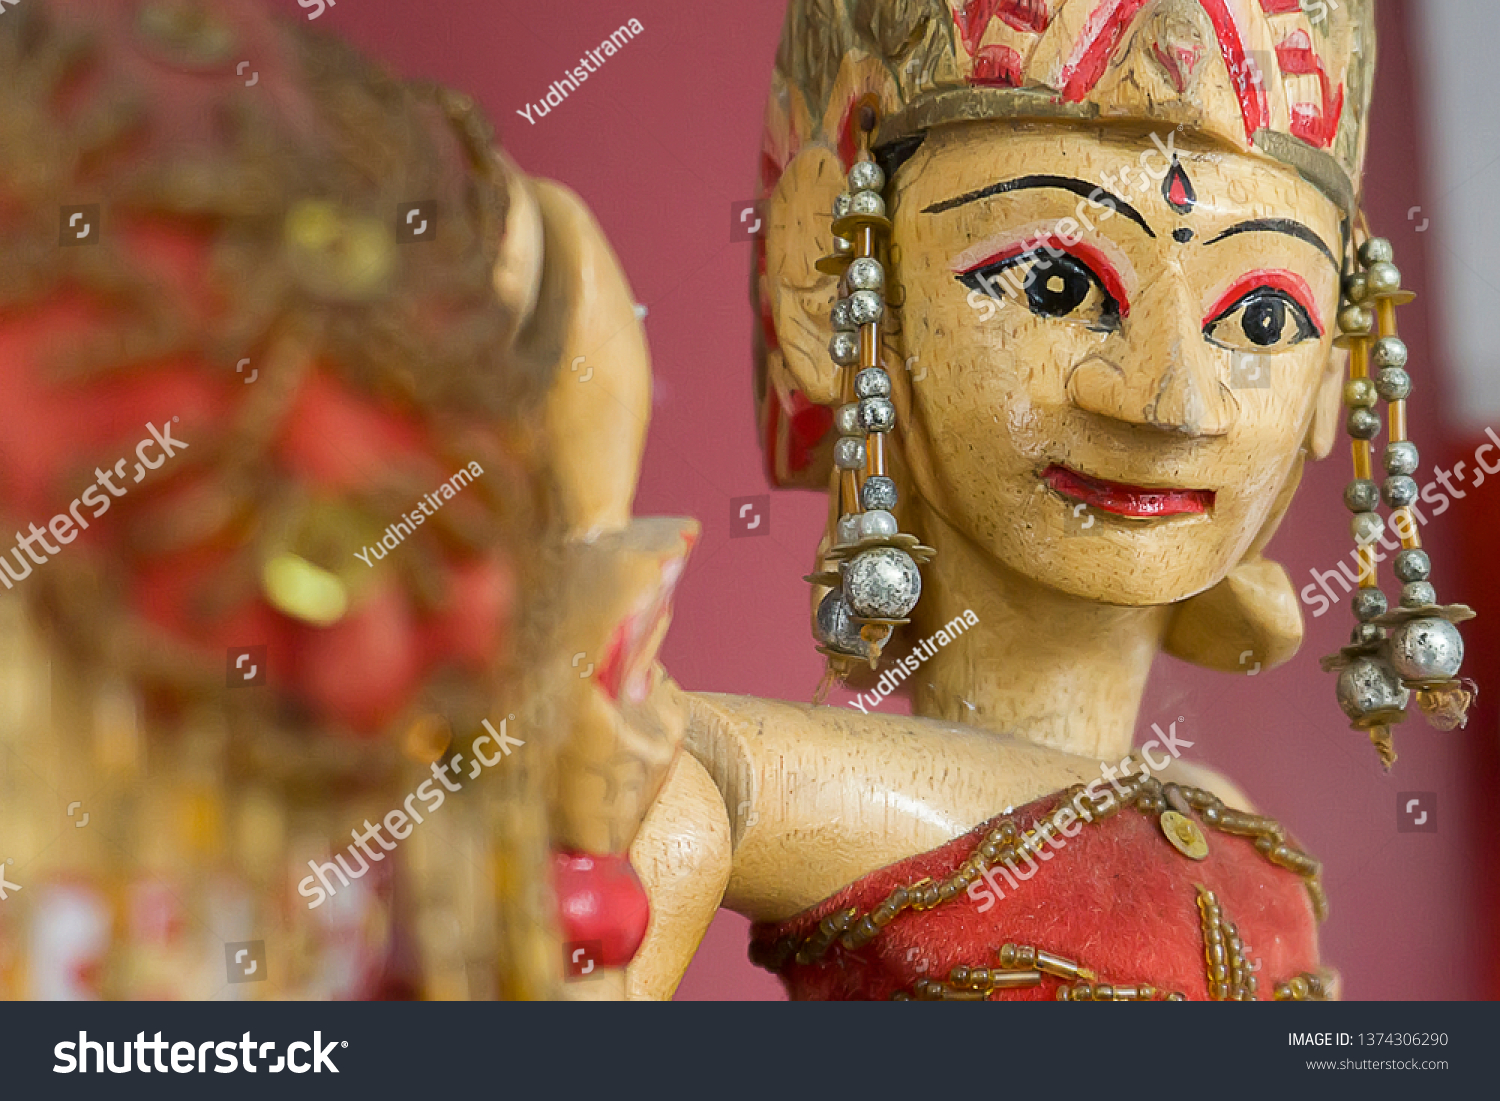  A close up of a wooden Wayang Golek puppet, a traditional Indonesian puppet made of wood and fabric.